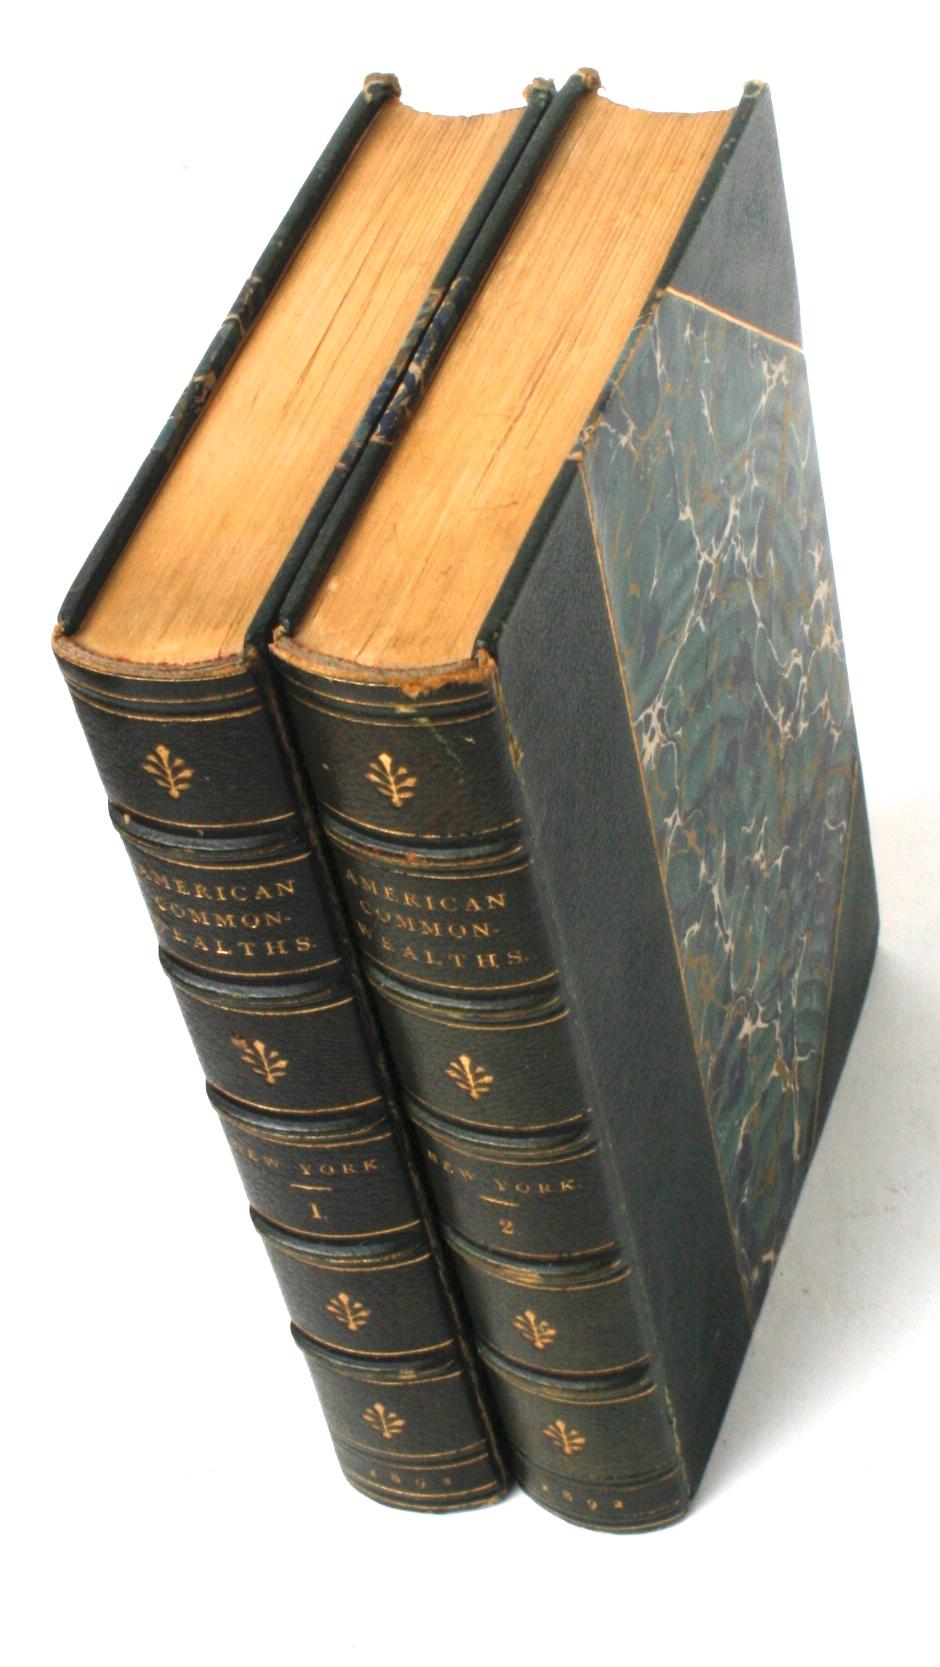 American Commonwealths, New York in Two Volumes 1